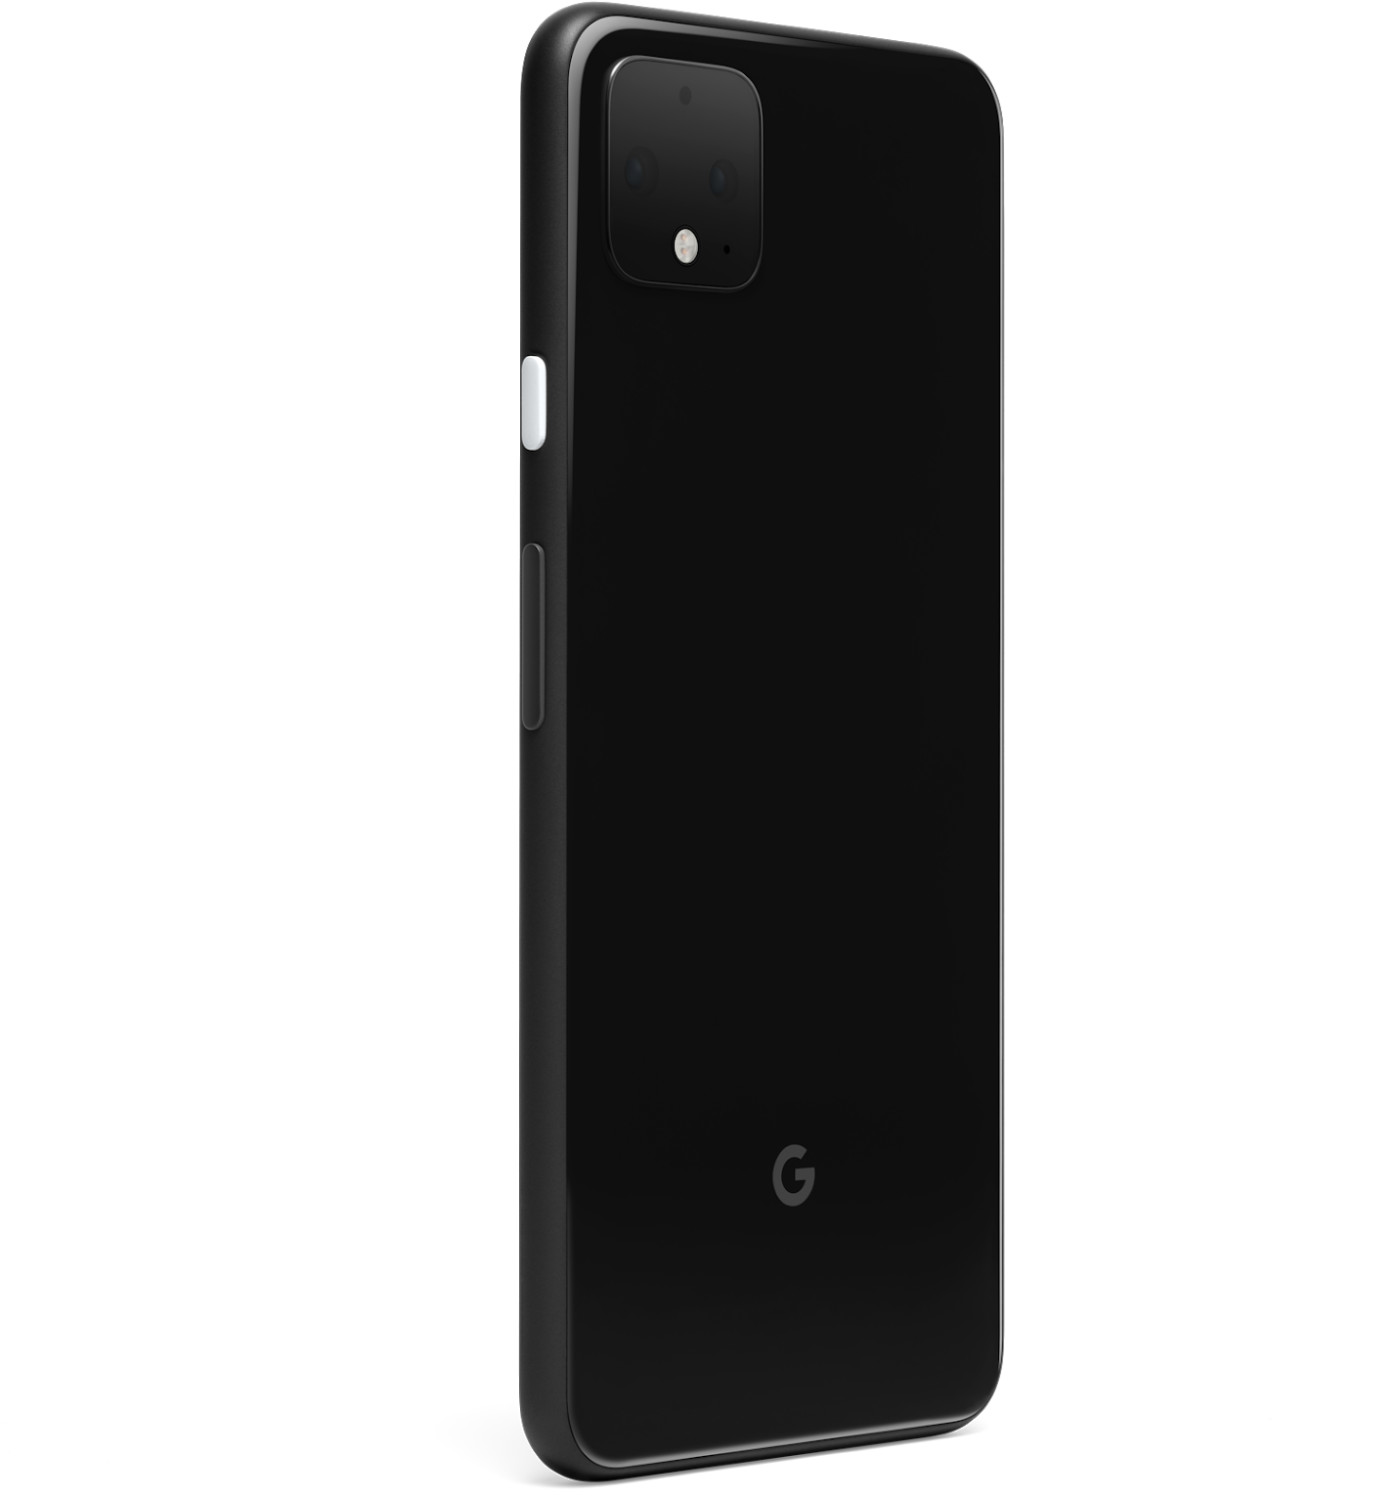 Buy Google Pixel 4 64GB Just Black from £399.00 (Today) – Best Deals on ...